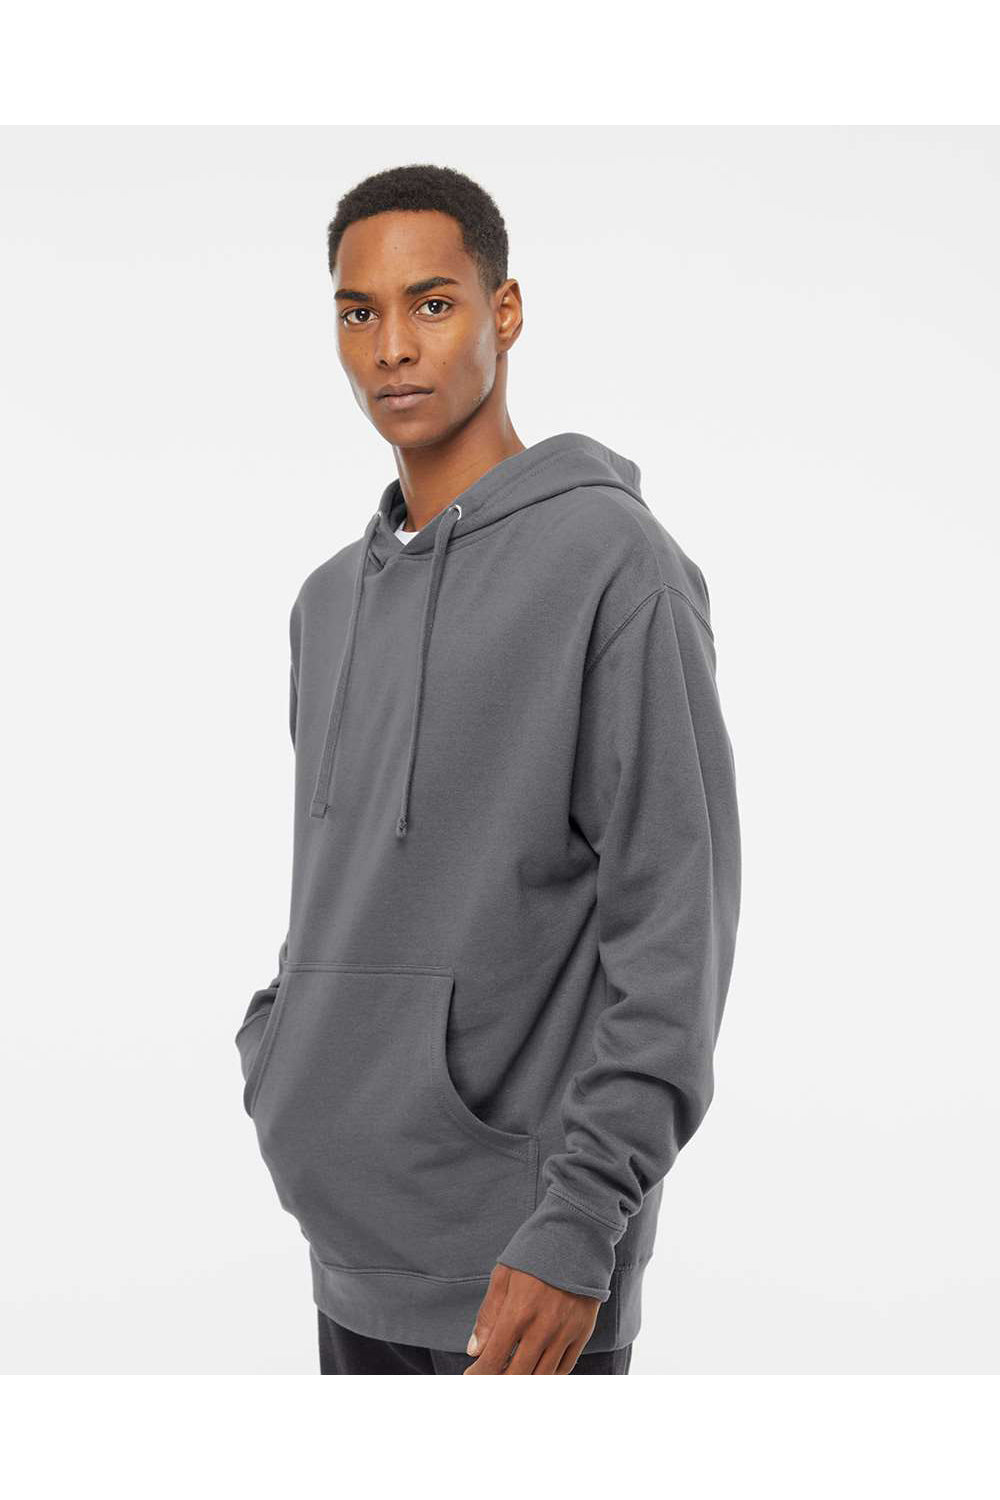 Independent Trading Co. SS4500 Mens Hooded Sweatshirt Hoodie Charcoal Grey Model Side